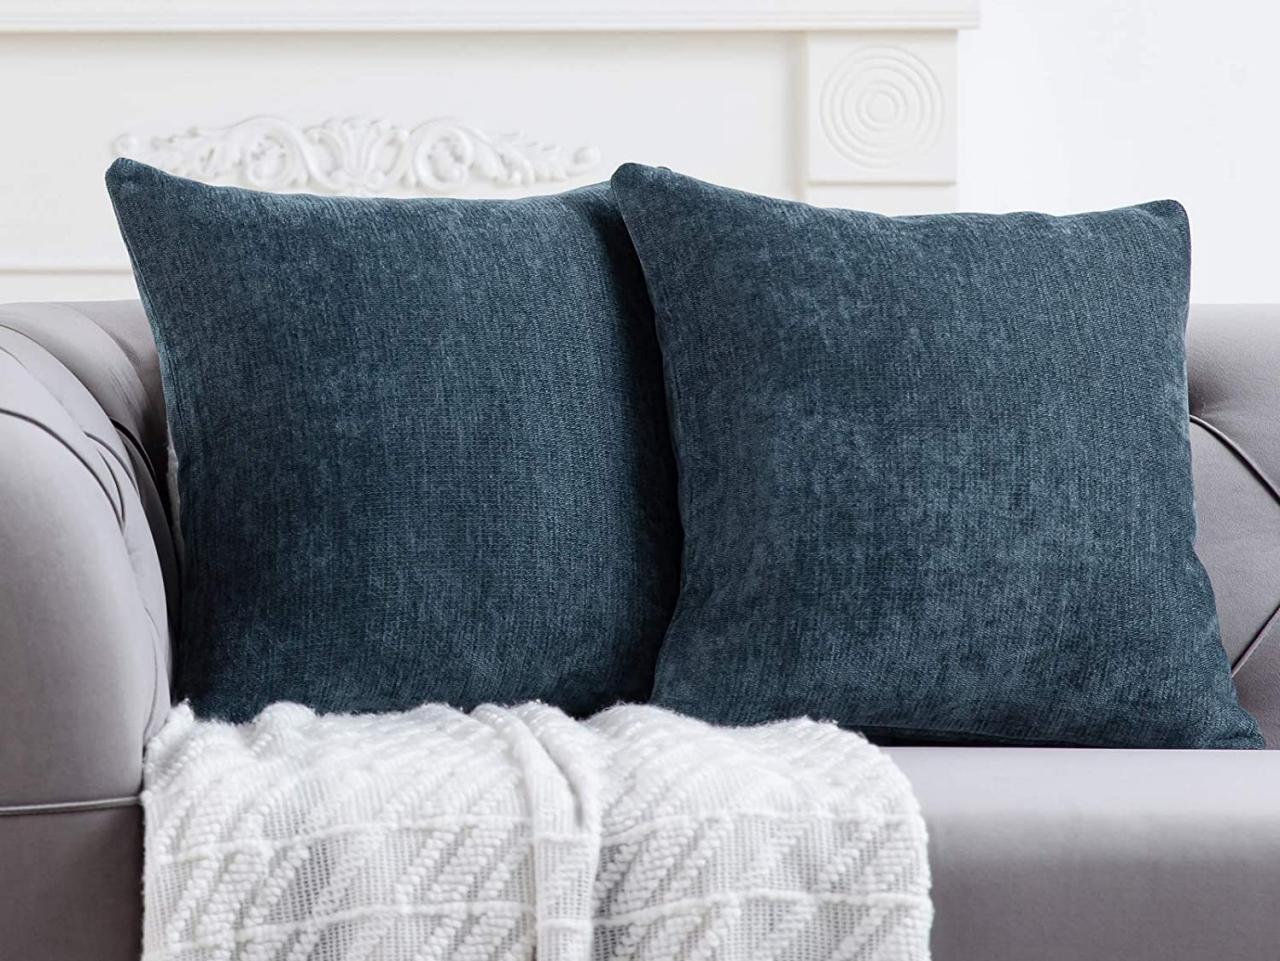 The Best Fall Throw Pillows to Spruce Up Your Space in 2022